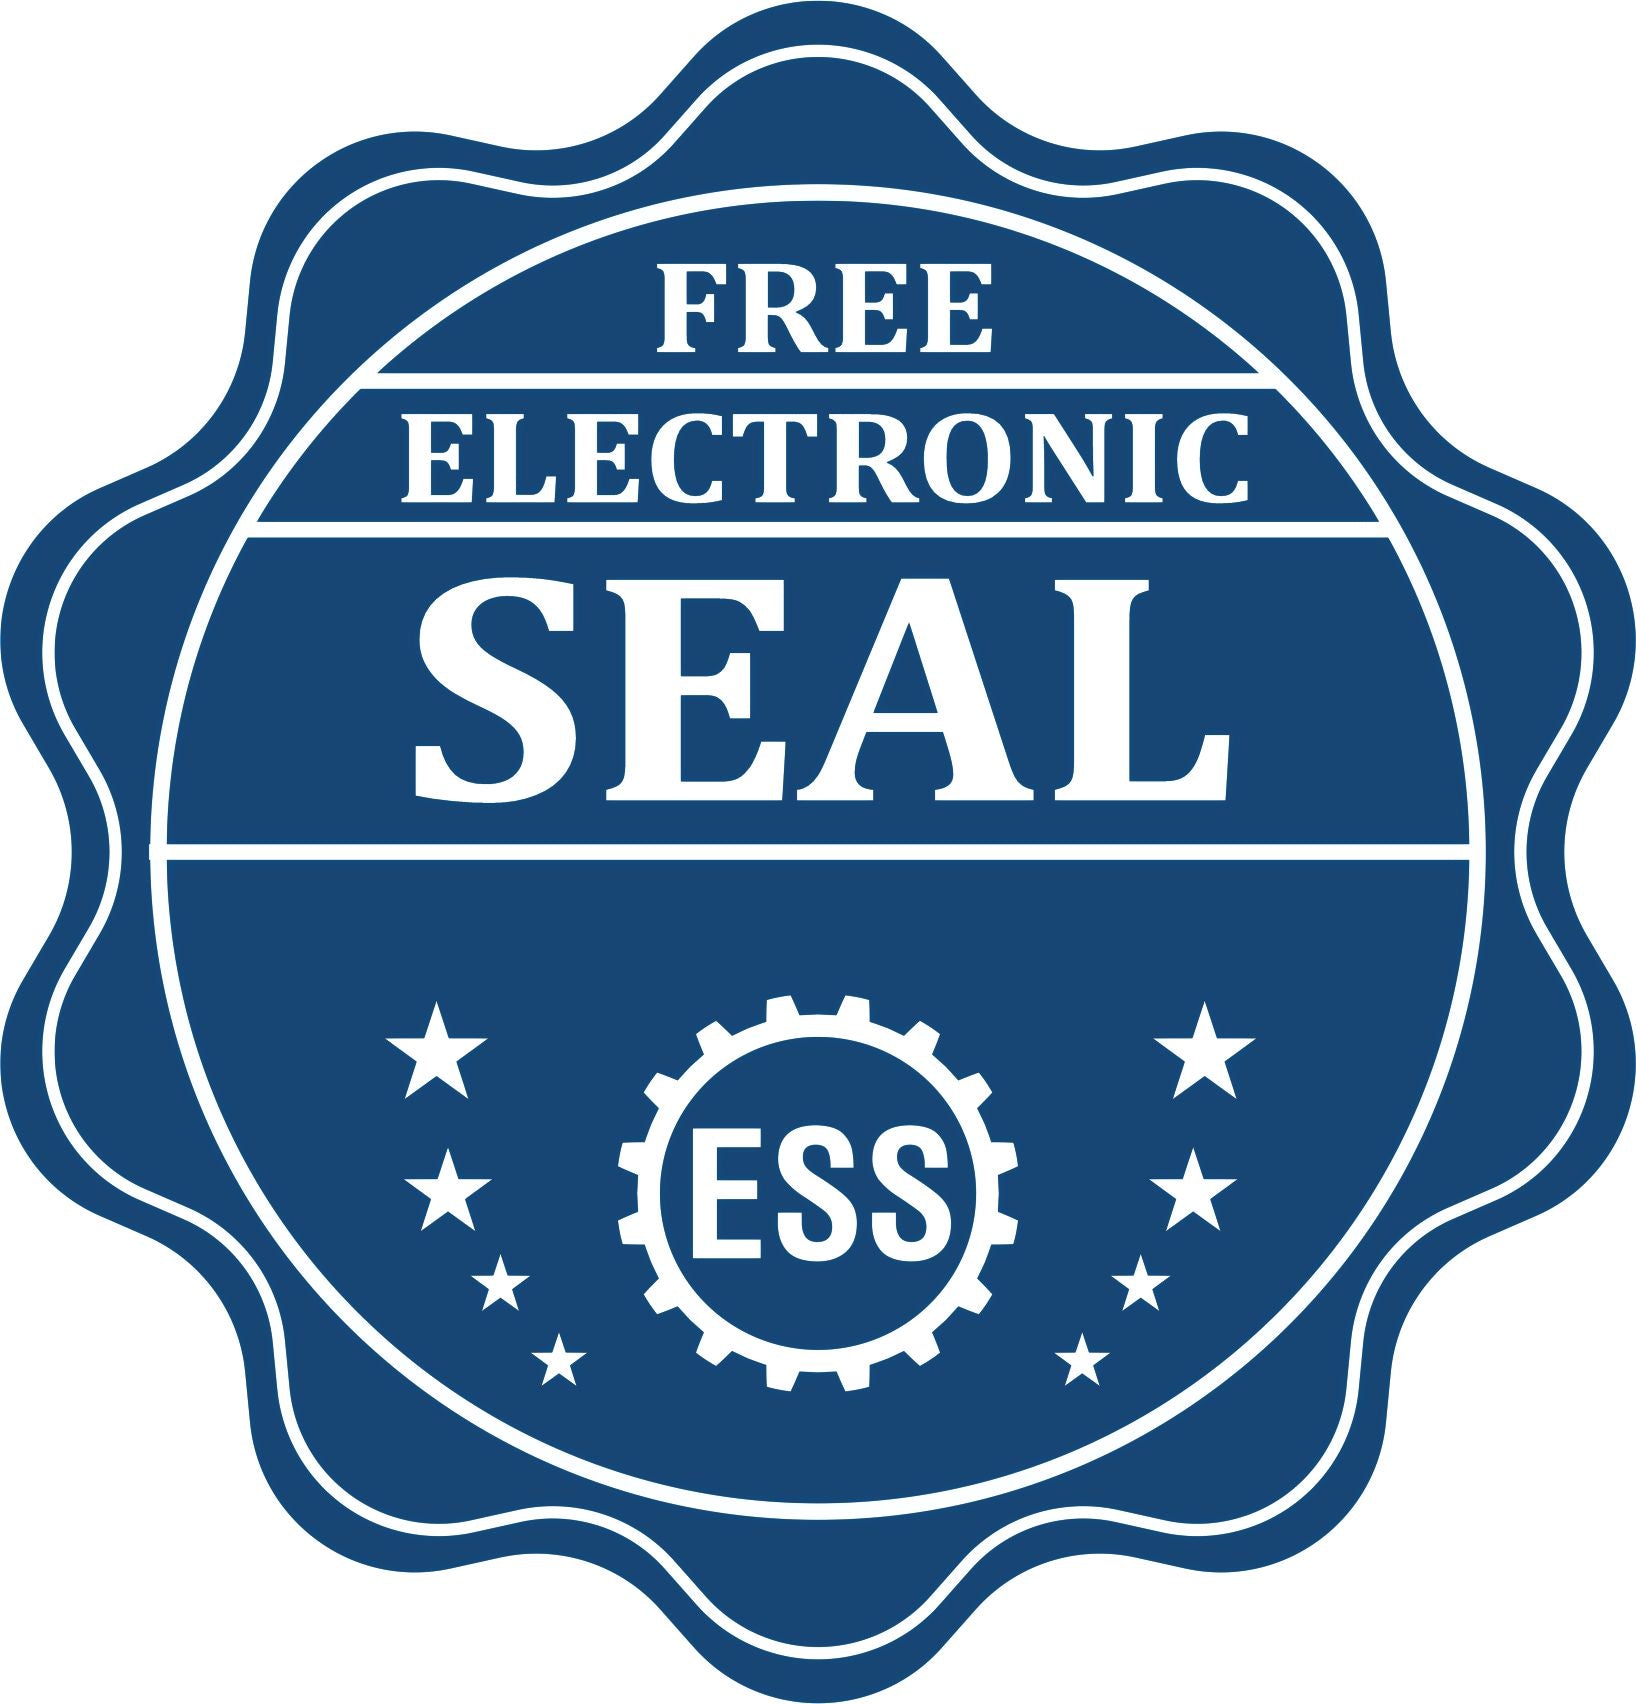 A badge showing a free electronic seal for the Arizona Engineer Desk Seal with stars and the ESS gear on the emblem.